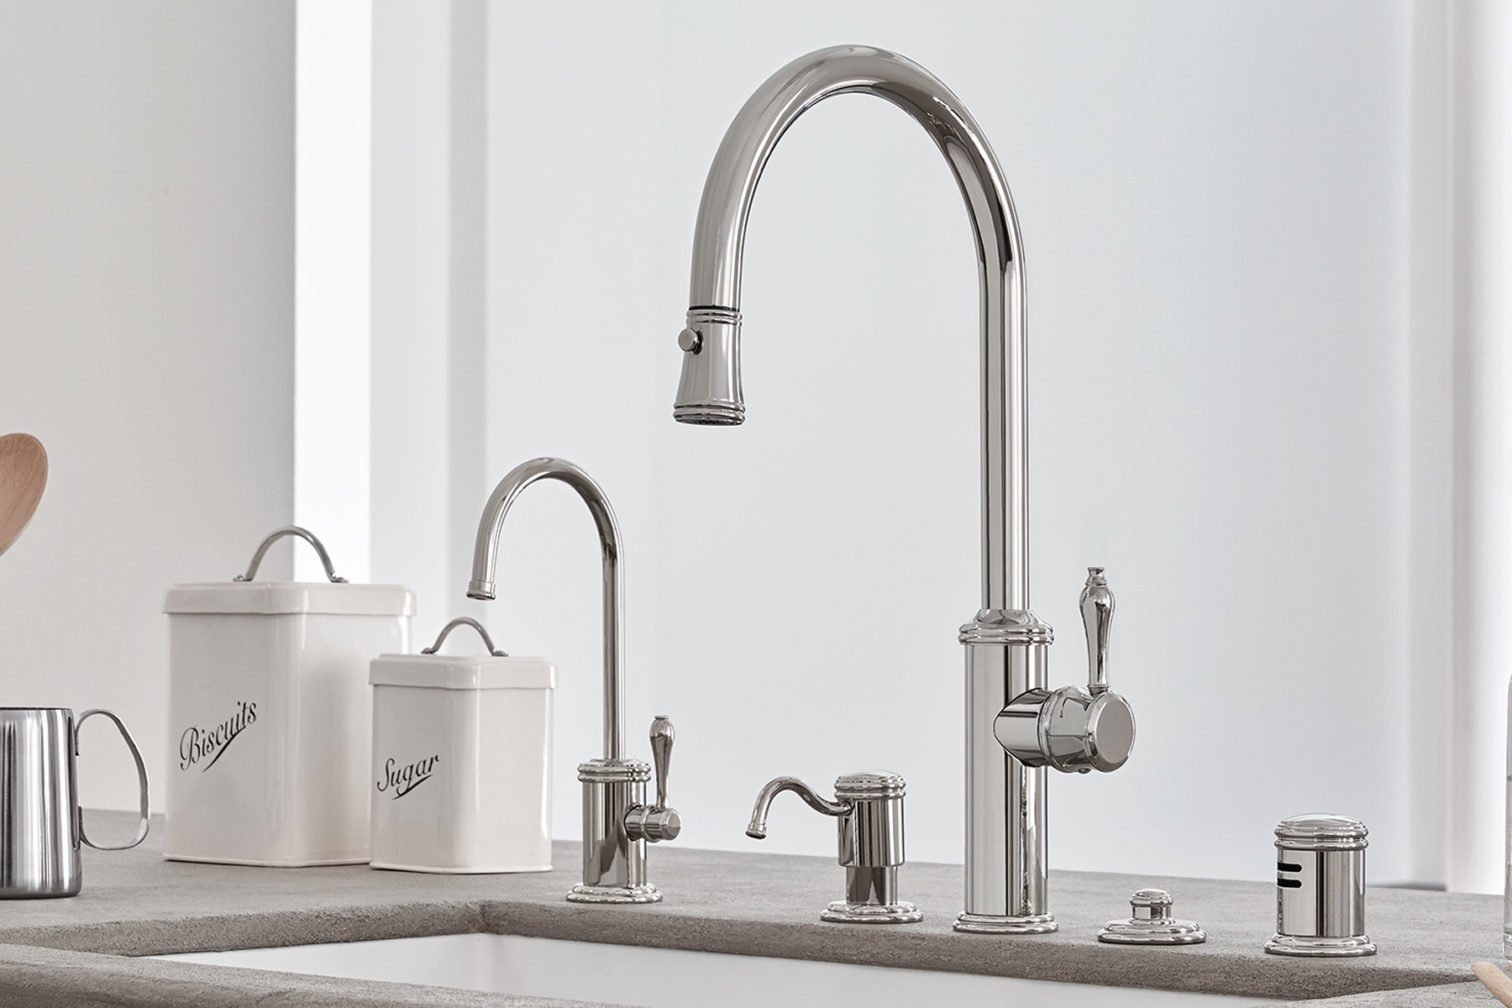 The Kitchen Collection From California Faucets   California Faucets